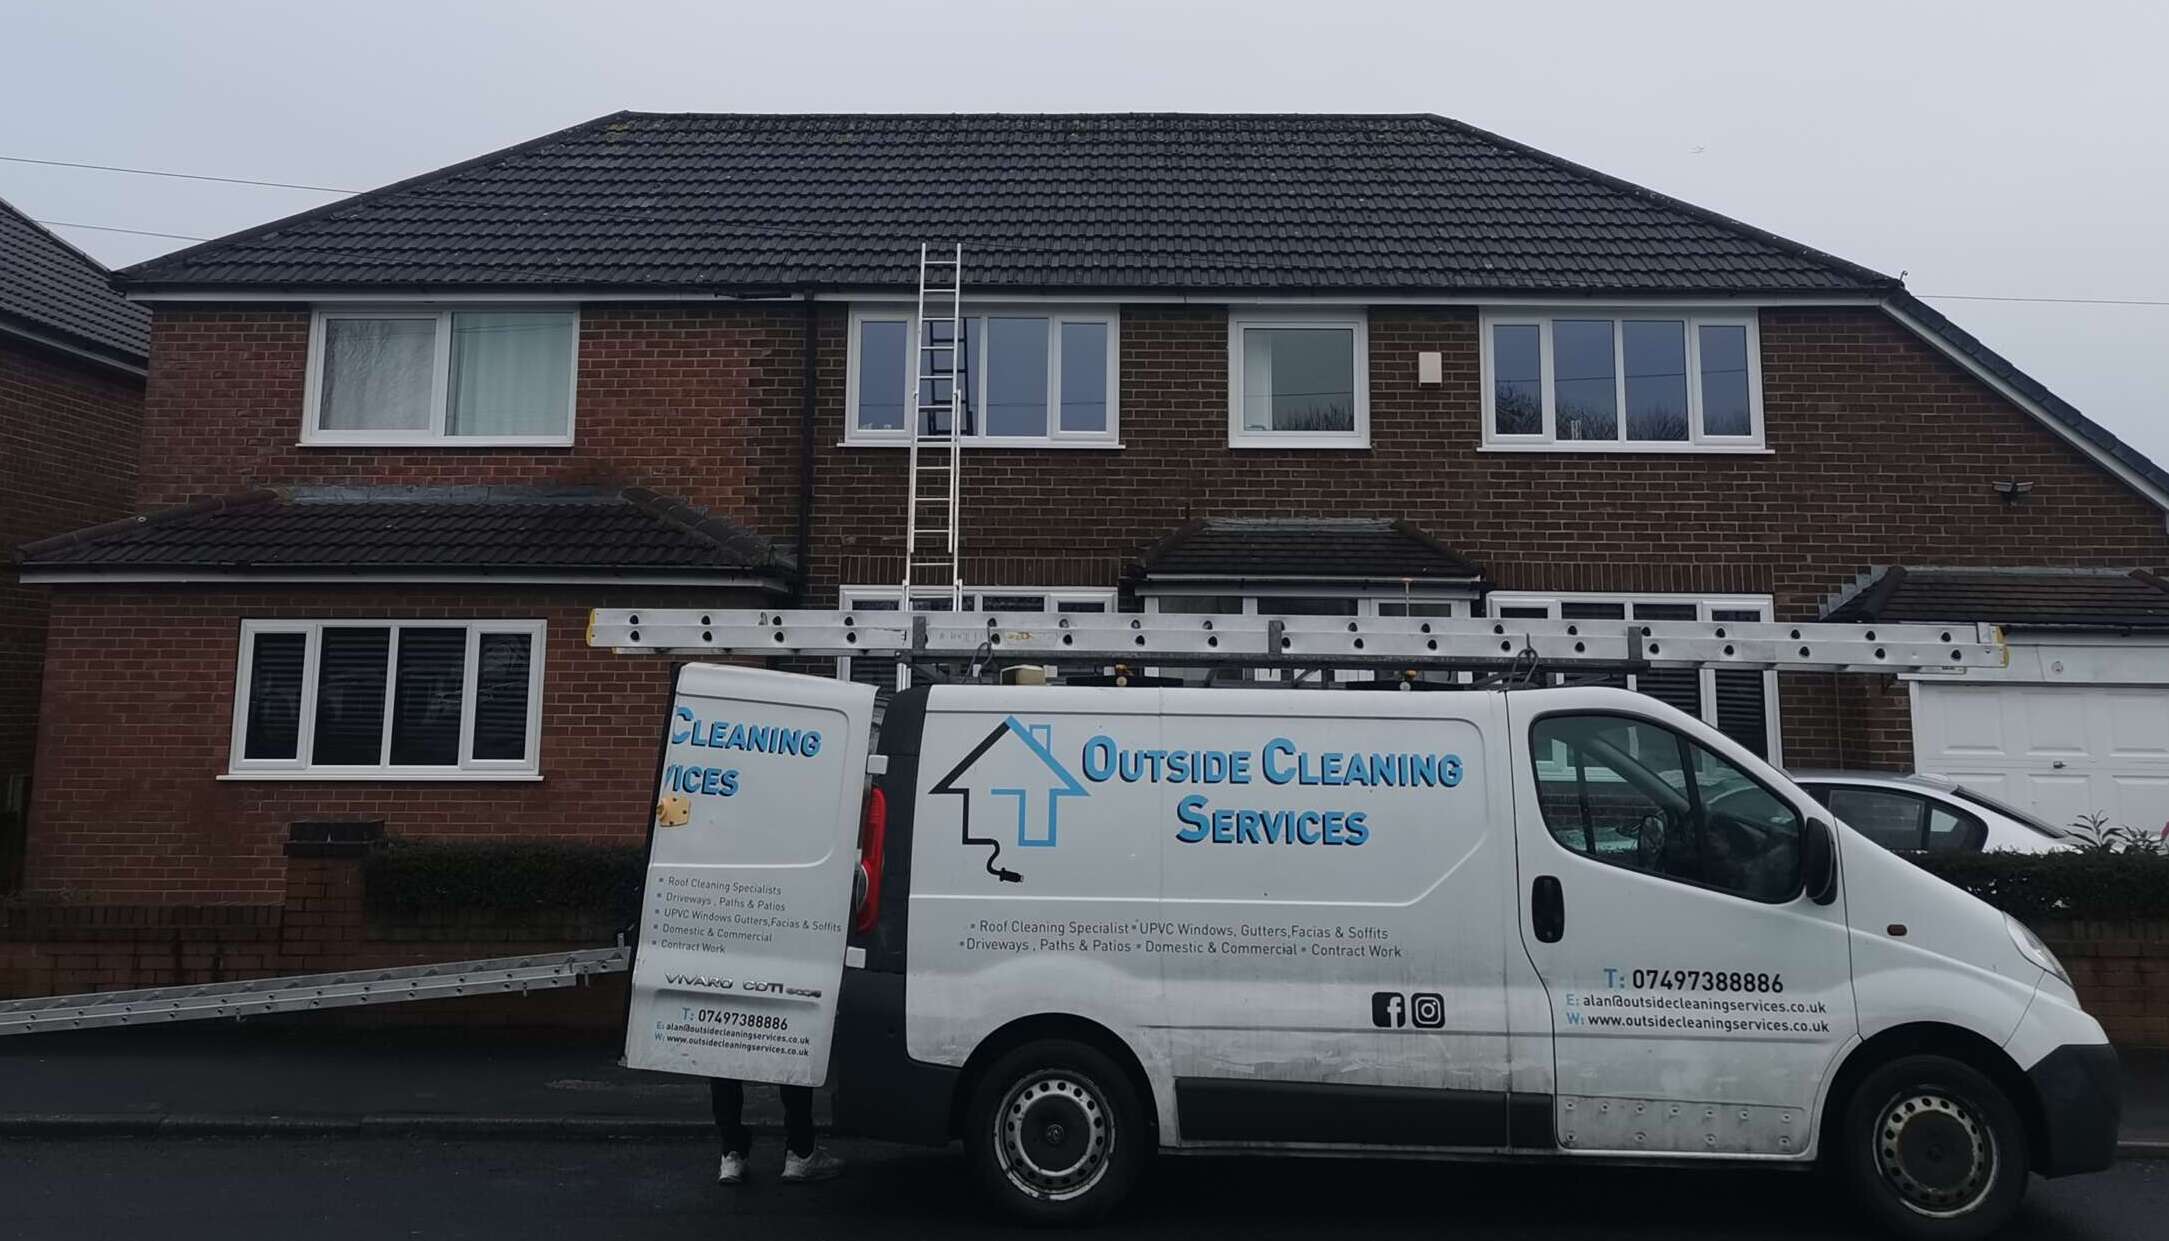 Outside cleaning services, cleaning service, pressure cleaning, roof cleaning, driveways, patio, paths, upvc cleaning, professional and cheap cleaning services, facade cleaning, outside cleaning,